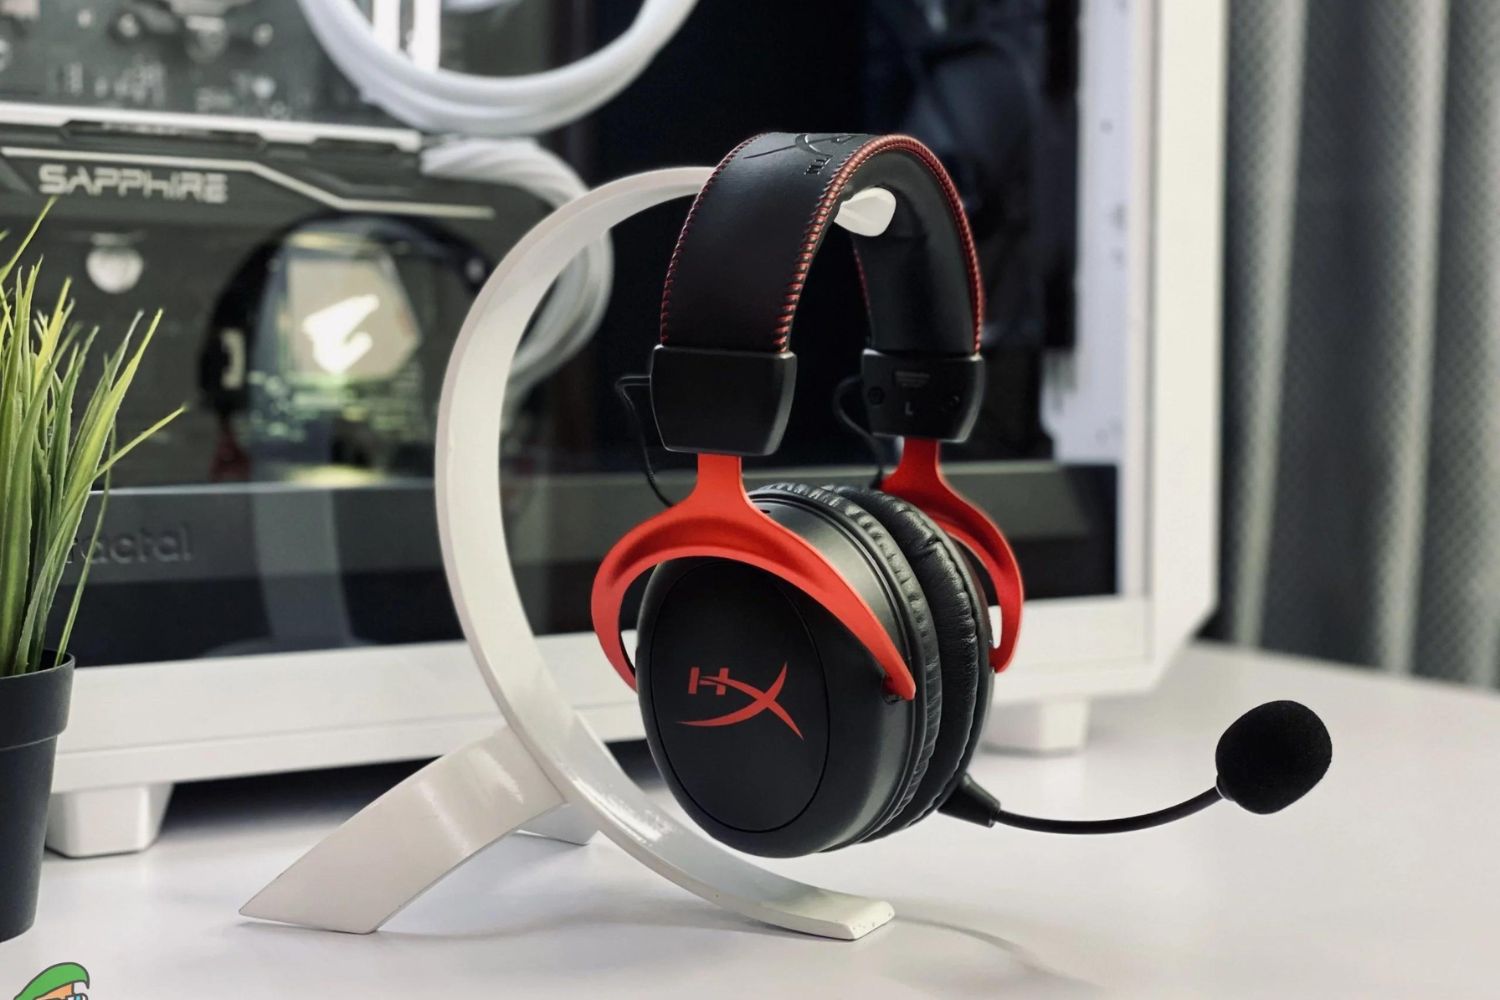 How To Connect Hyperx Cloud II Gaming Headset To Xbox One